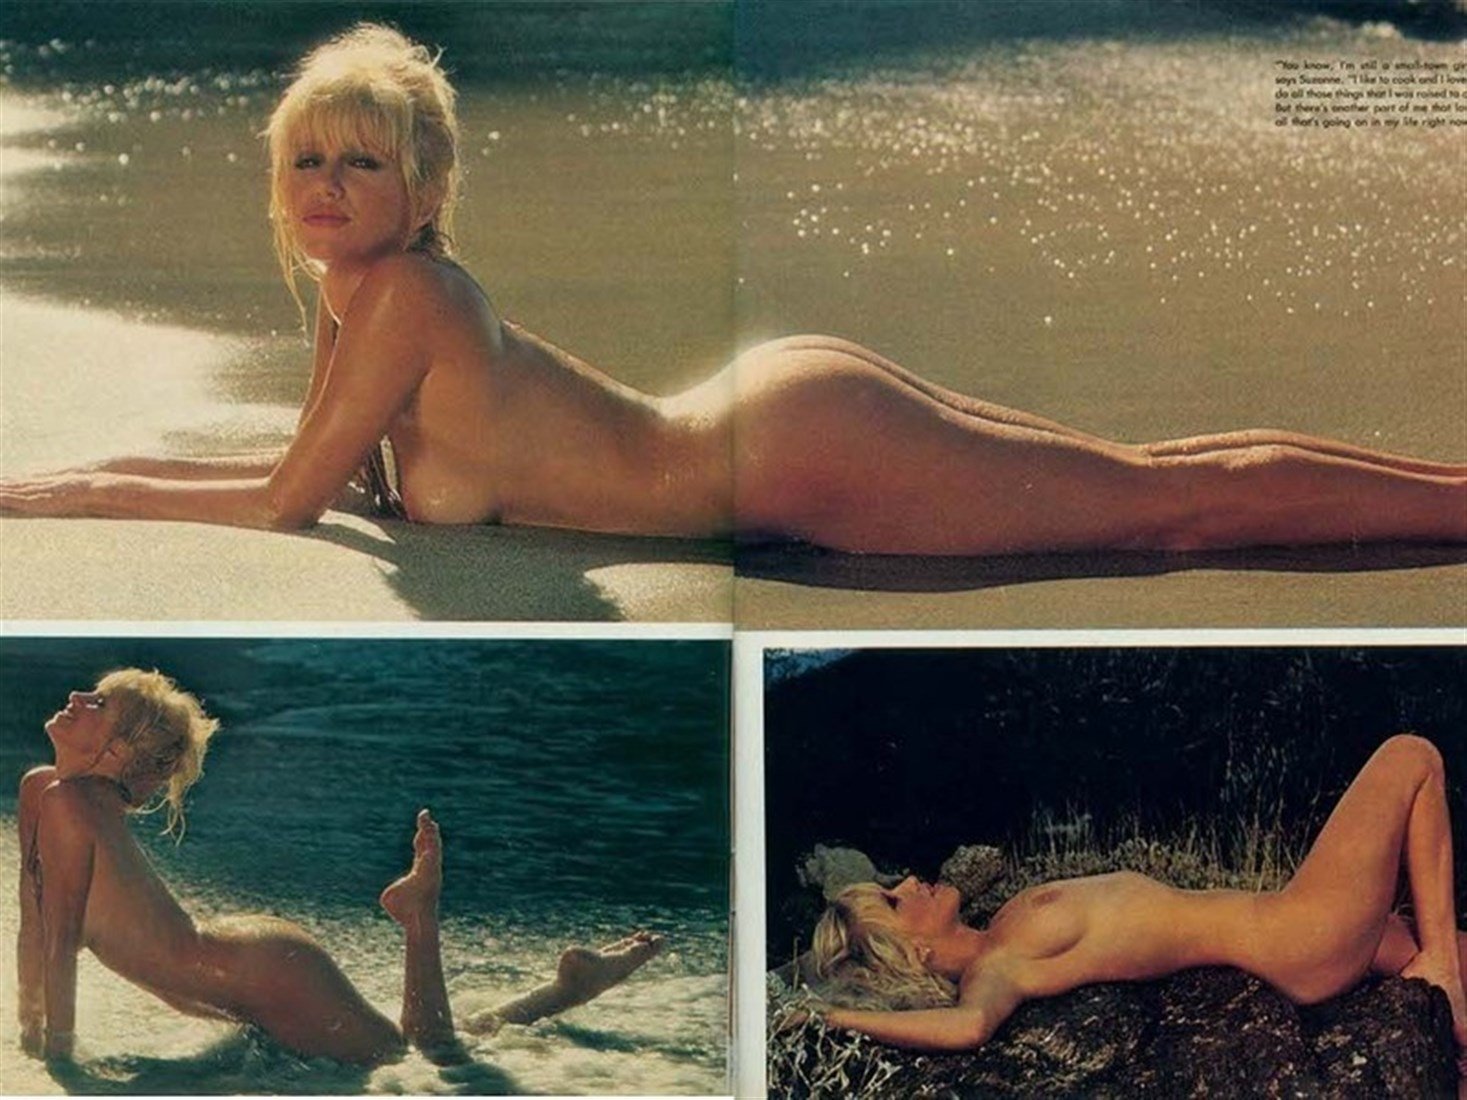 Suzanne Somers Fully Nude Photos